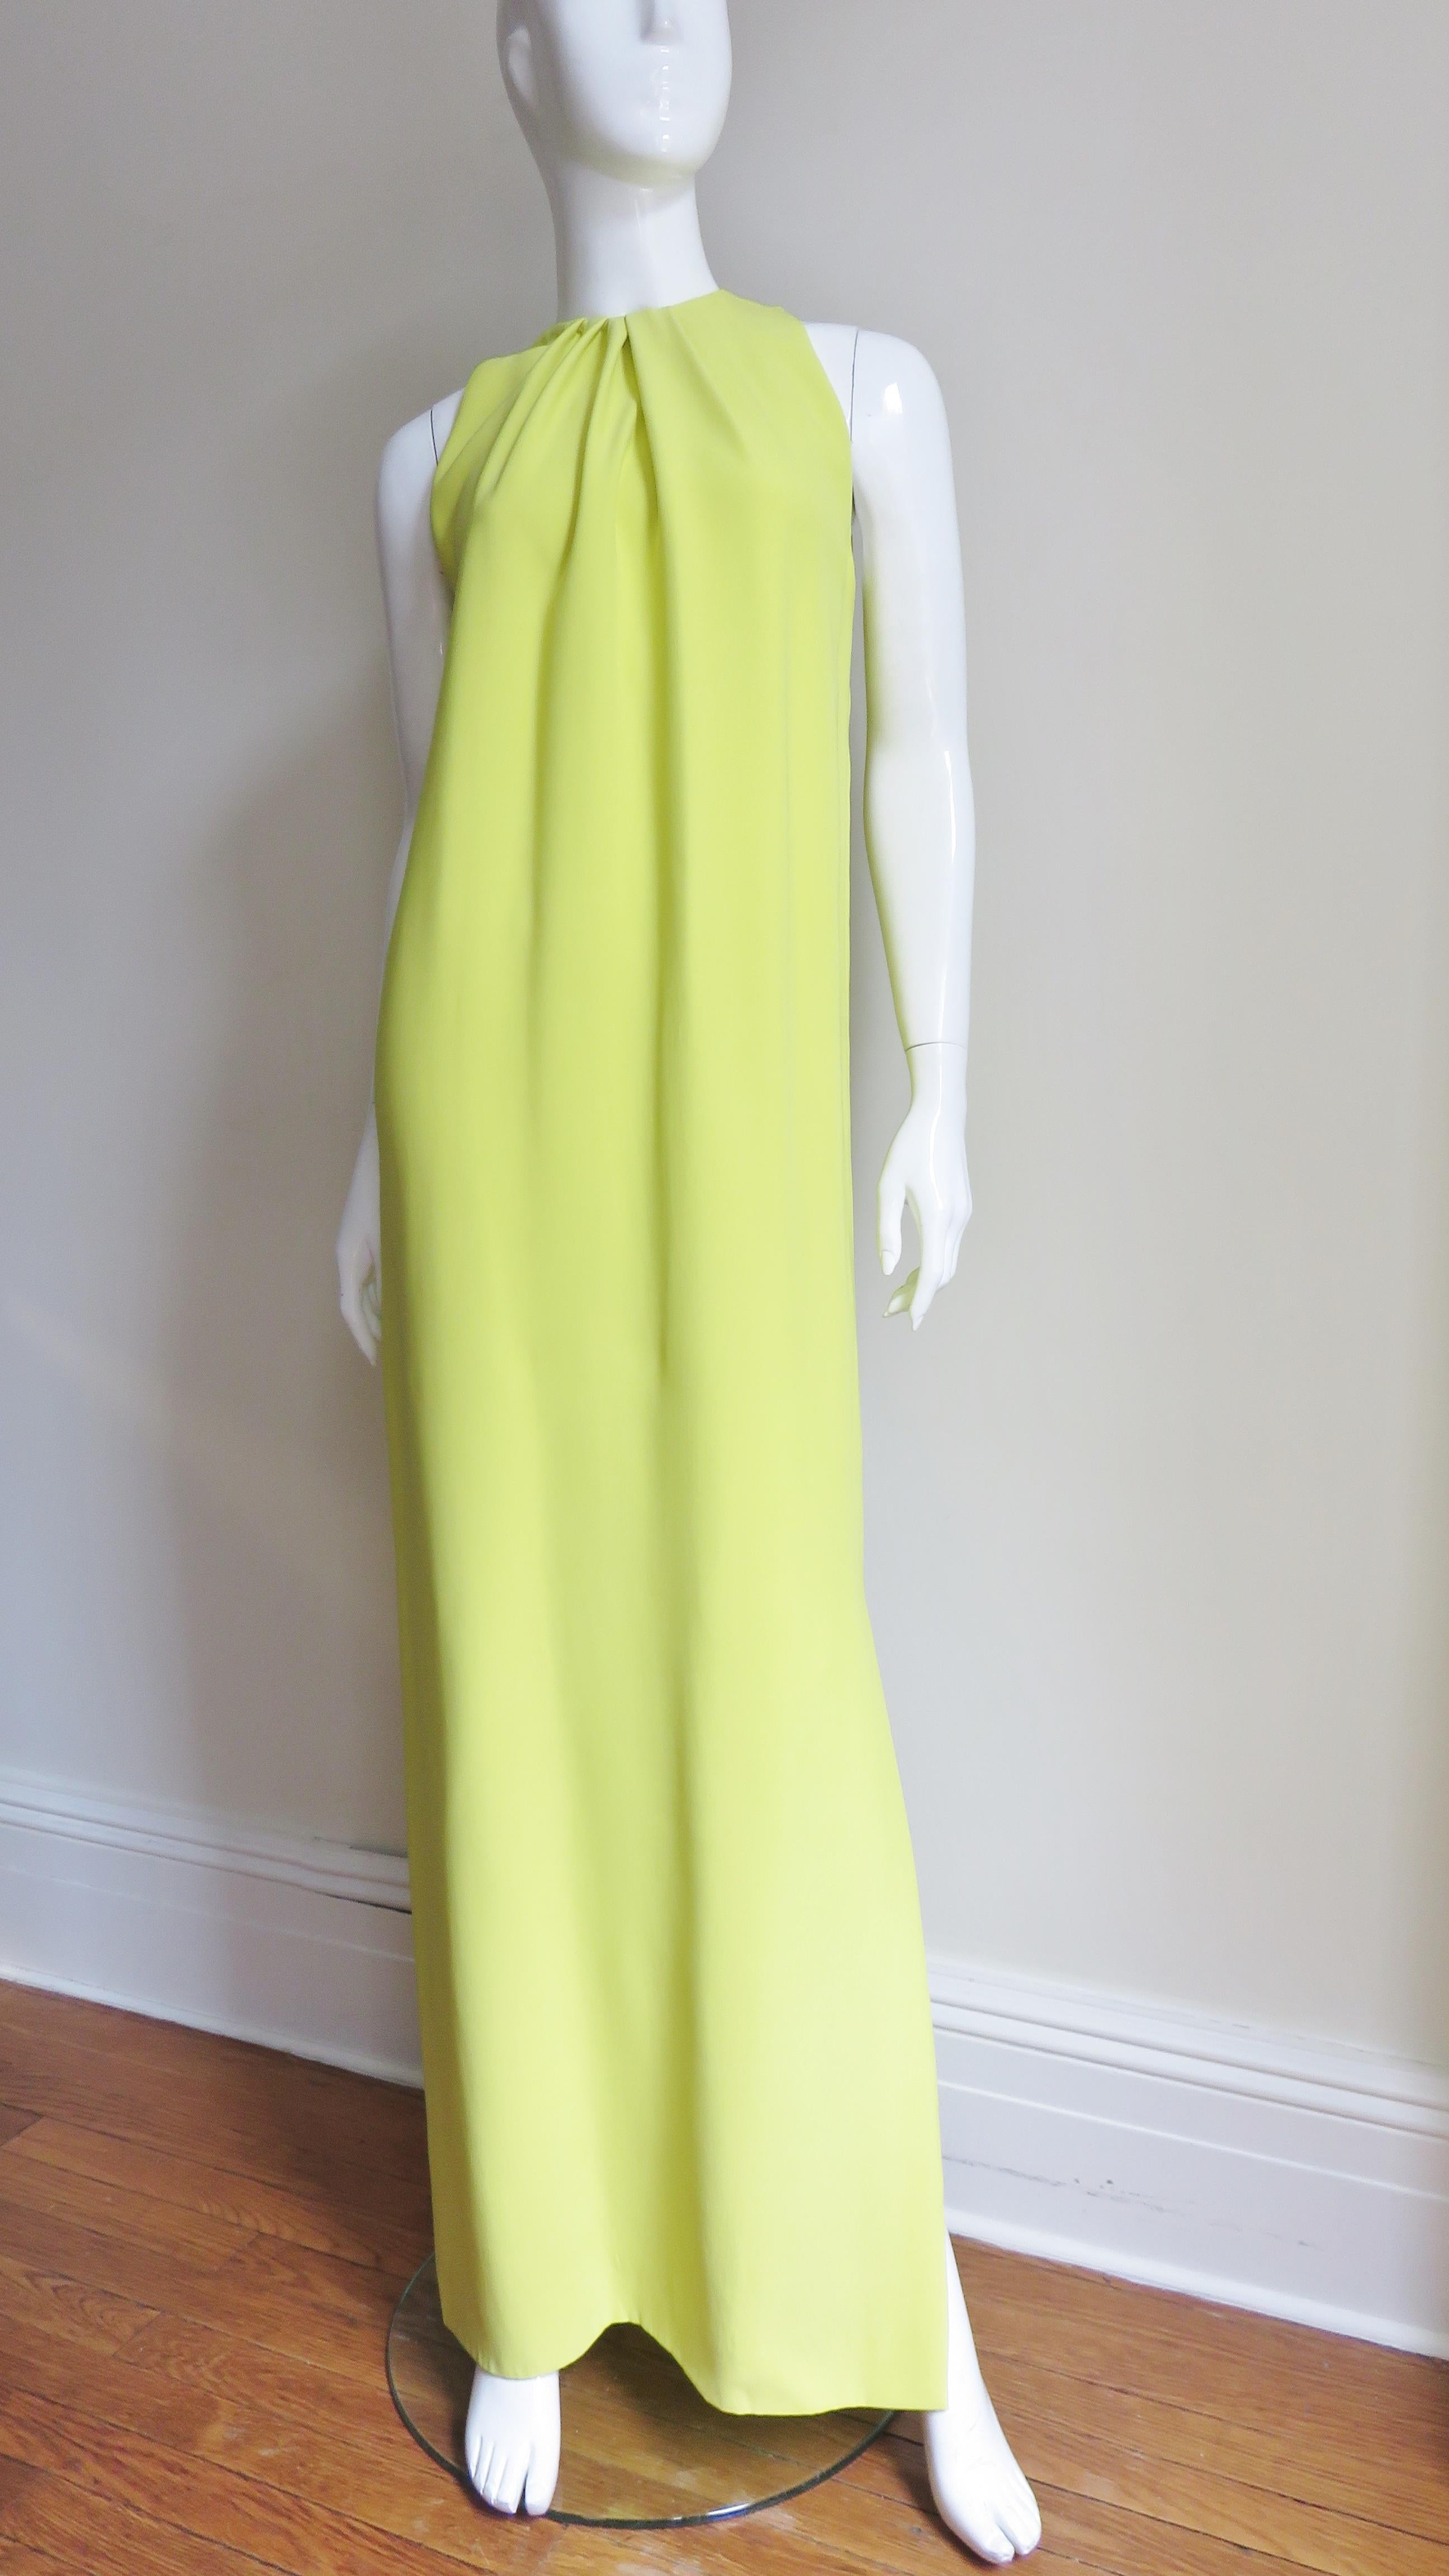 Christian Dior New Silk Dress S/S 2015 In New Condition For Sale In Water Mill, NY